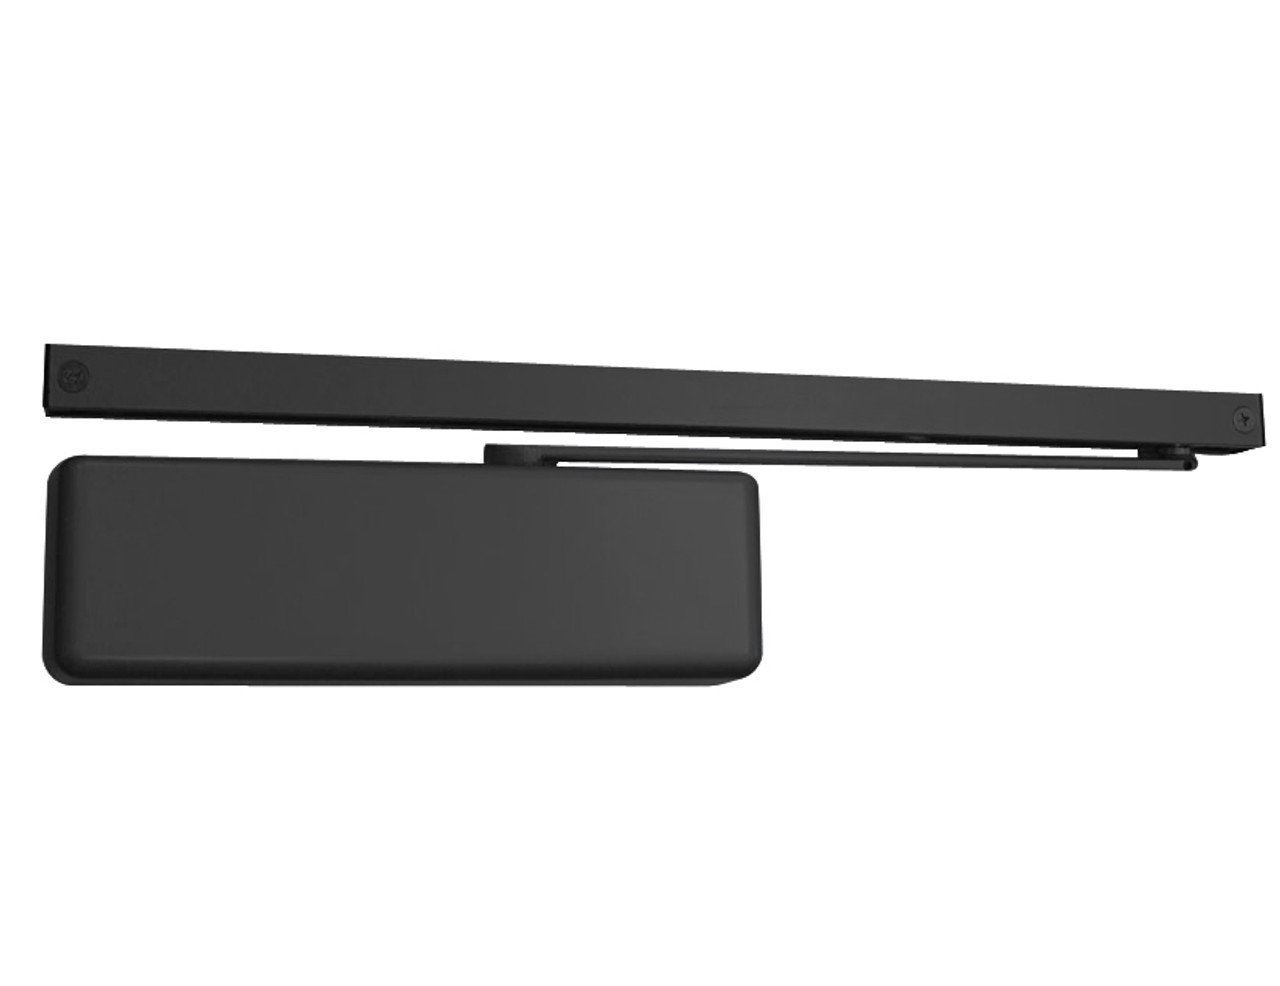 4040XPT-H-BUMPER-BLACK LCN Door Closer Hold Open Track with Bumper in Black Finish